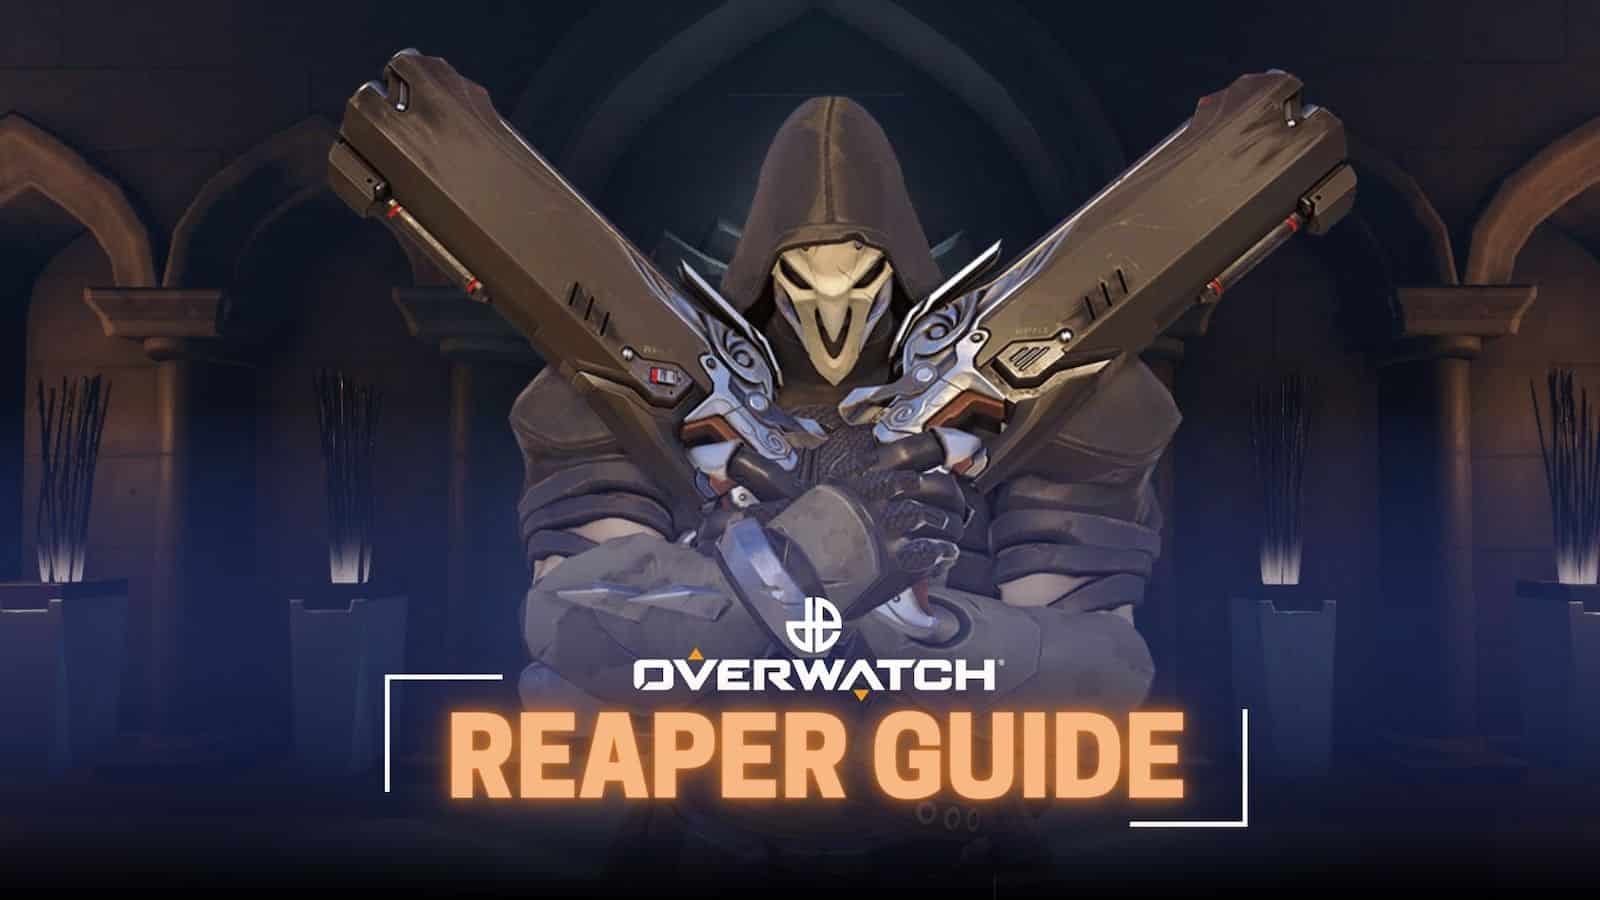 The ULTIMATE Reaper 2 Guide  EVERYTHING You Need To Know ! 